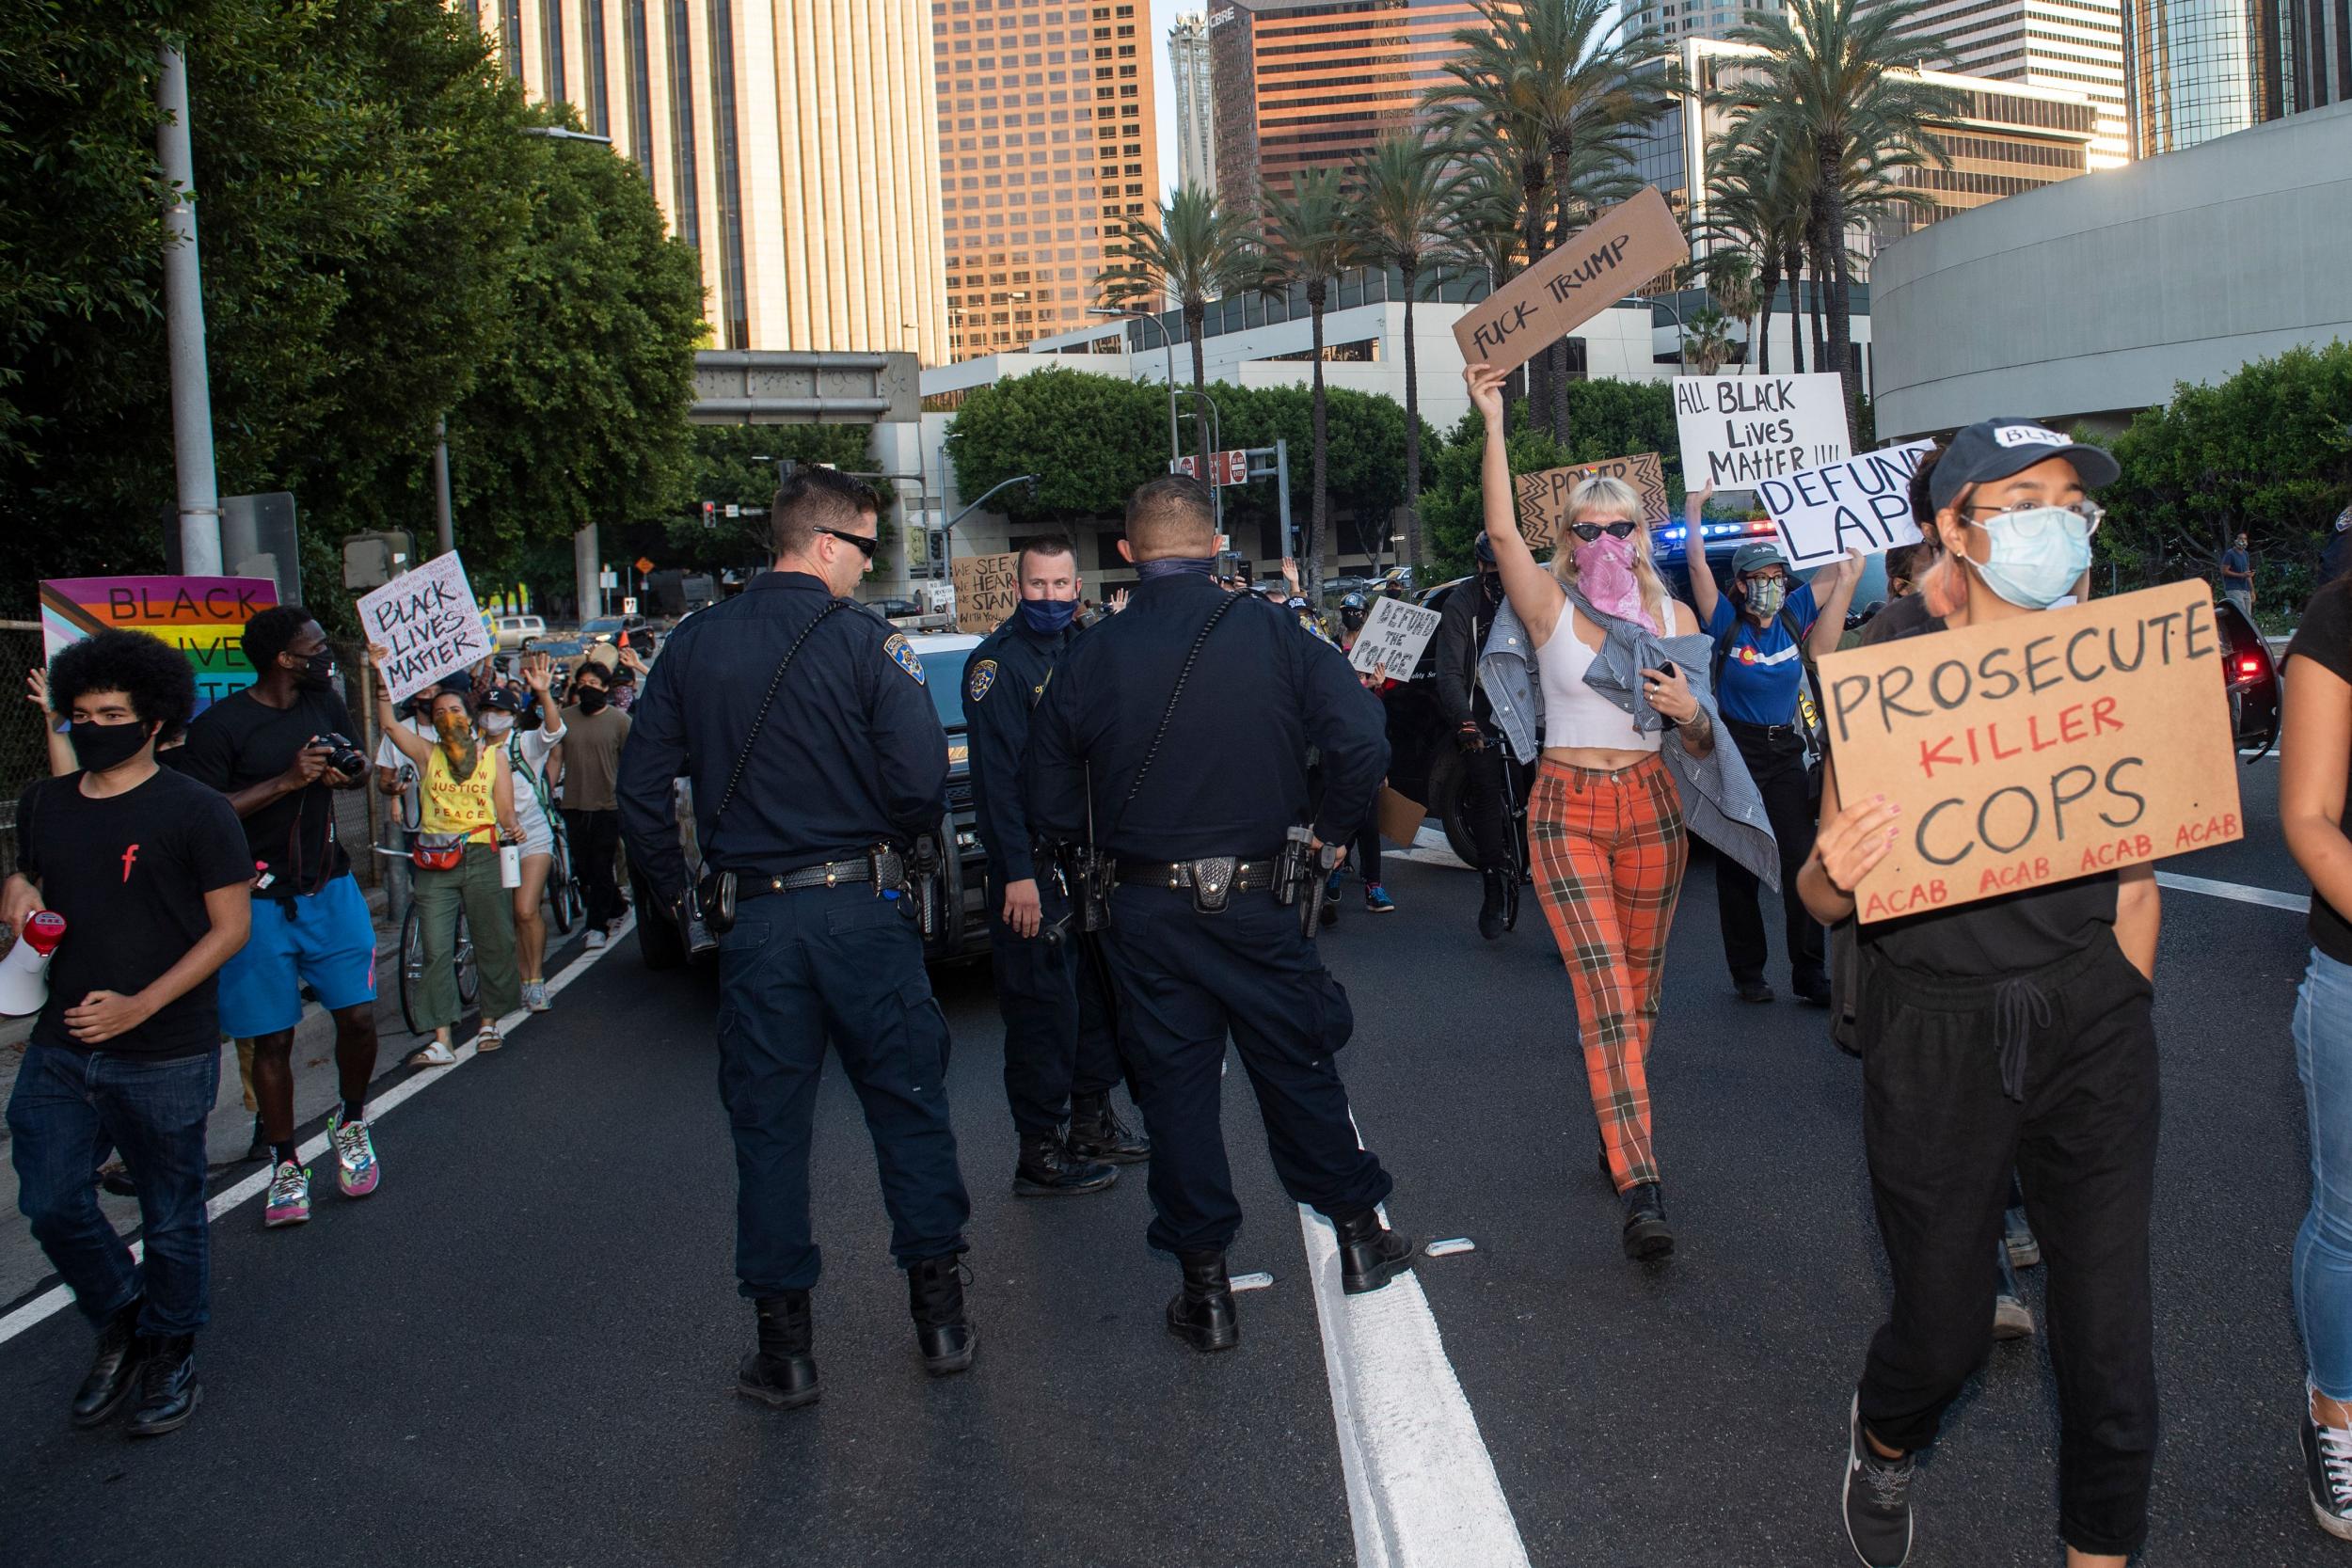 Protesters walk past police officers as they march toward the freeway during a demonstration calling for the removal of DA Jackie Lacey and to defund the police on 1 July